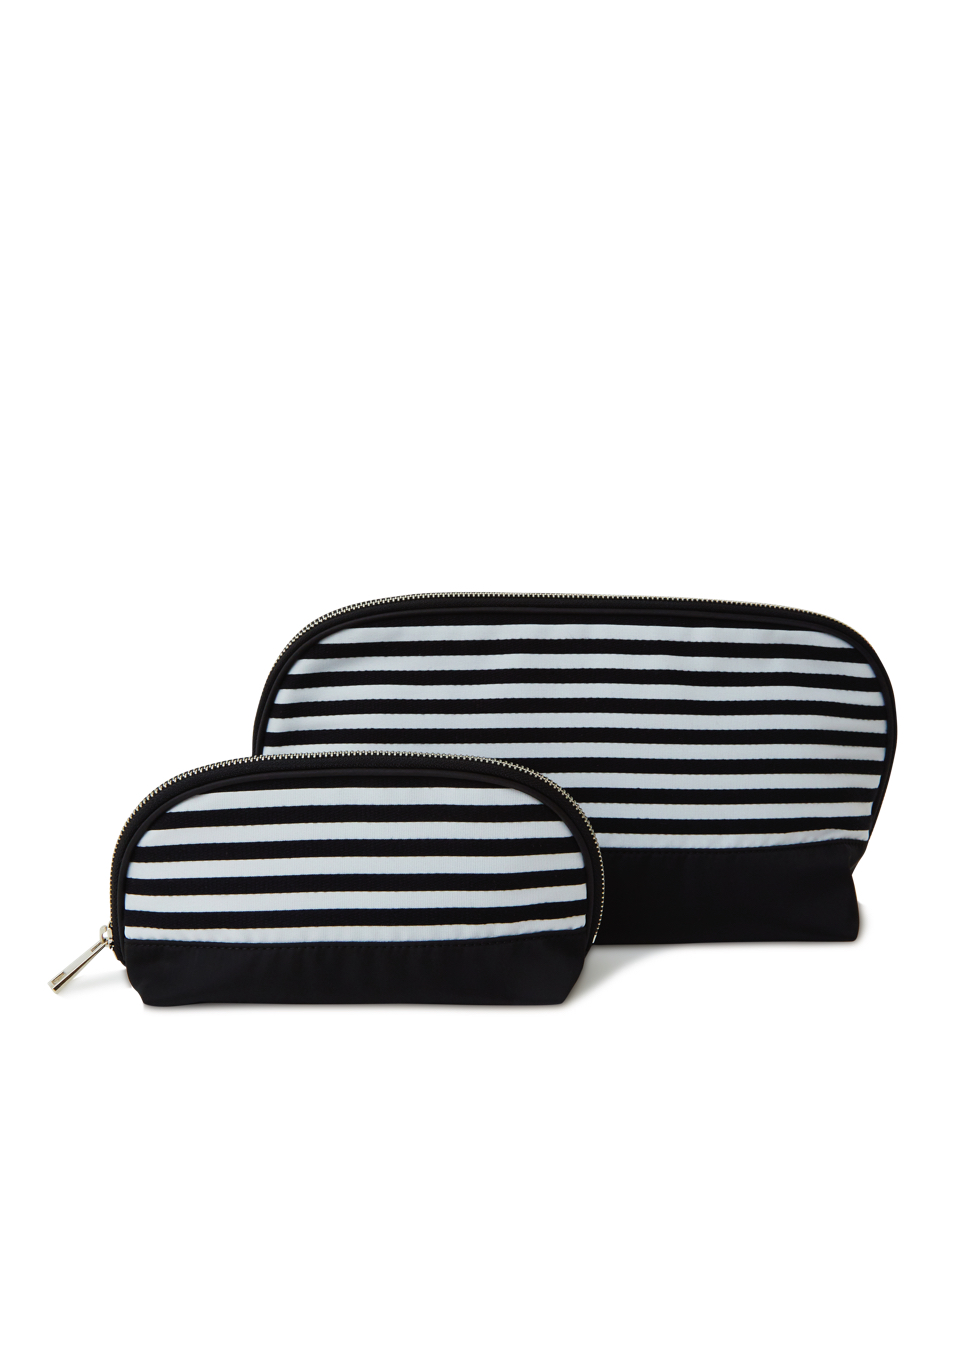 BORDER MAKE UP POUCH